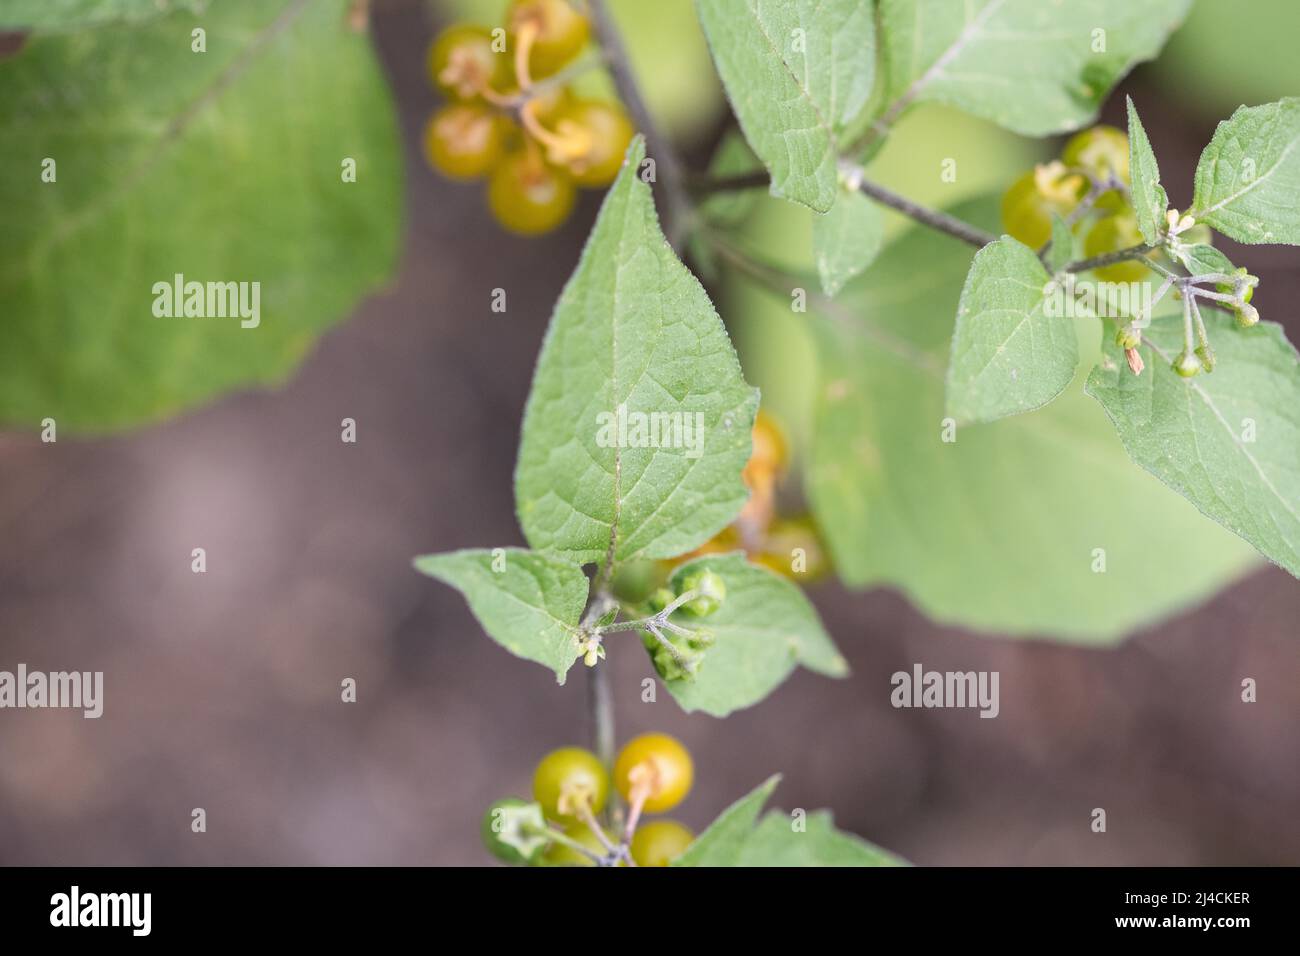 Yellow-fruited solanum physalifolium (Solanum villosum), growing in the garden View leaf and fruit from above, Velbert, Germany Stock Photo